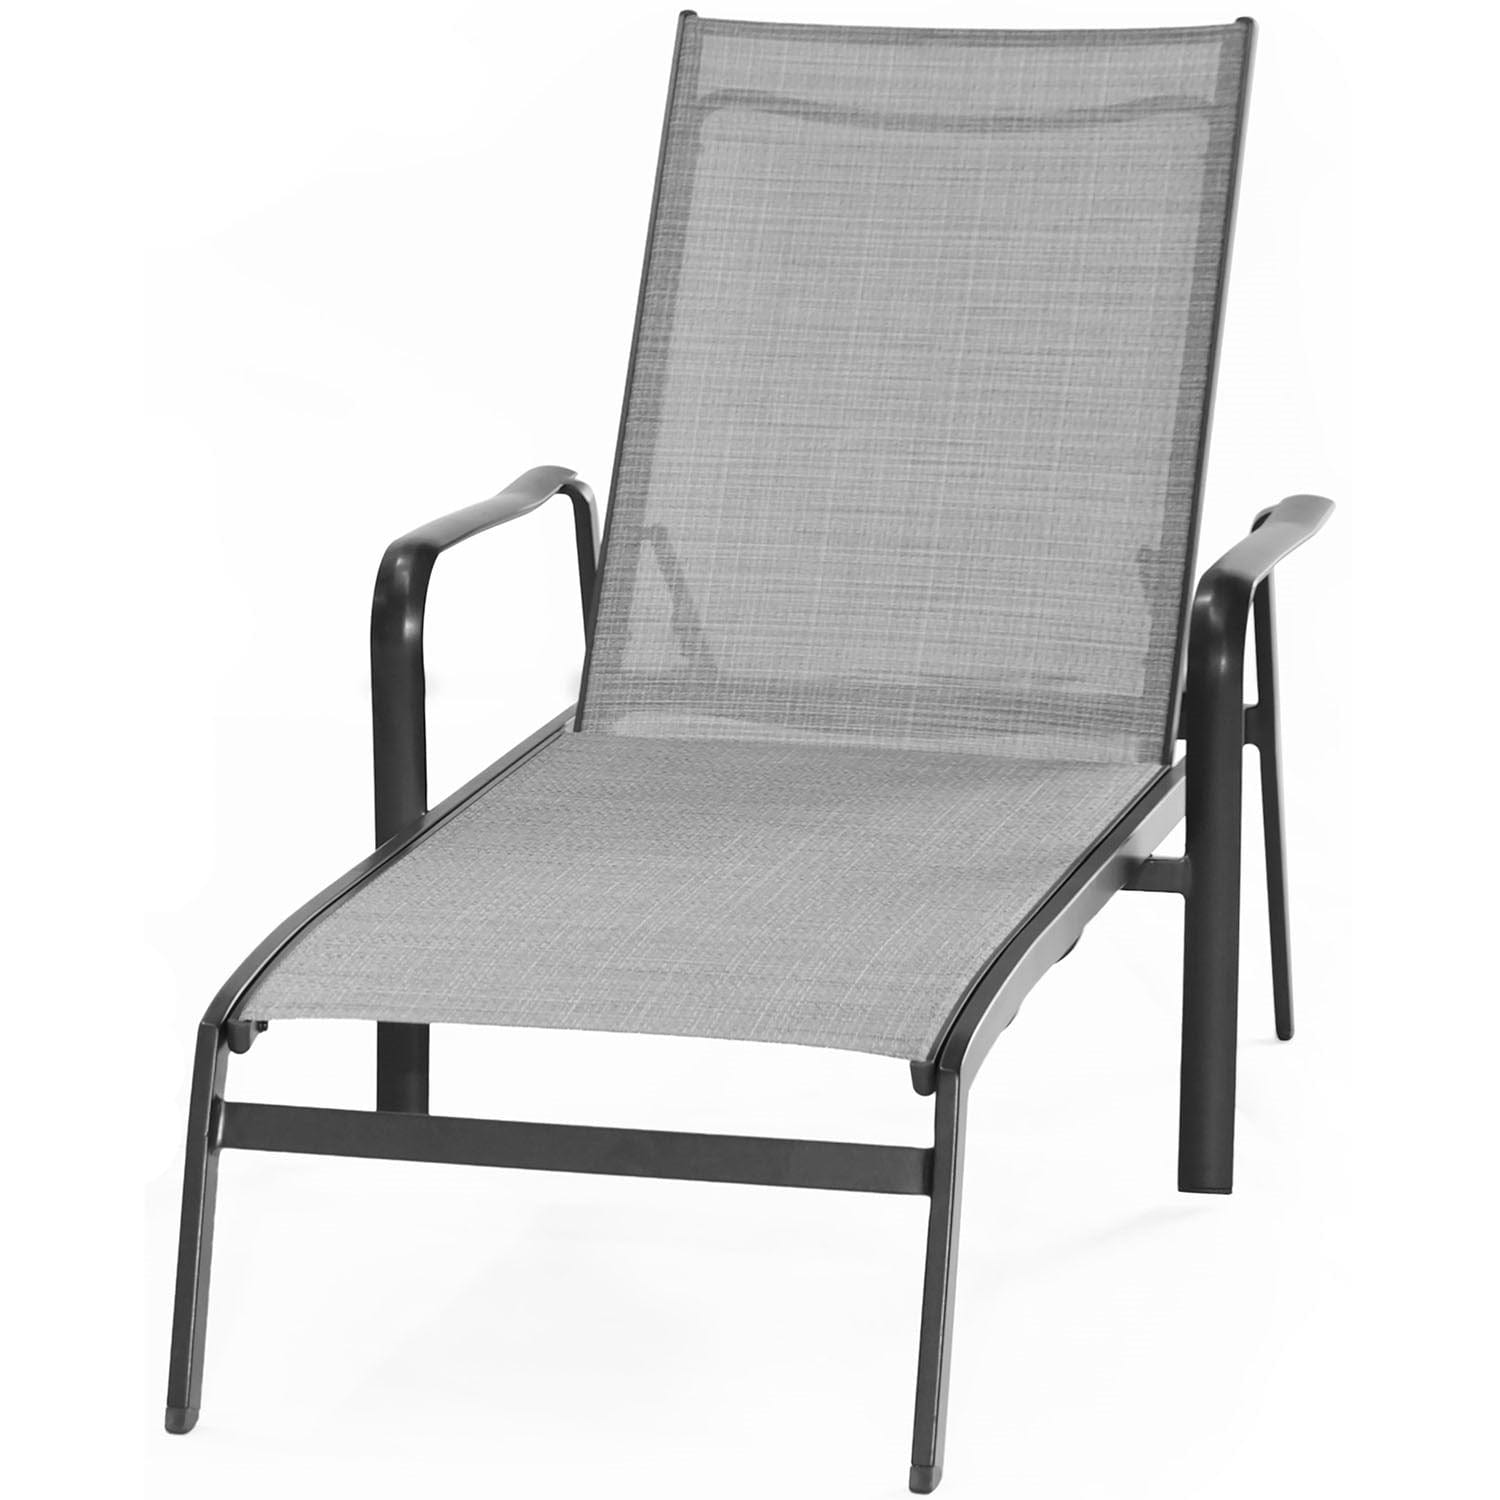 Hanover Chaise Lounge Hanover - Foxhill 2pc Chaise Lounge Chairs | FOXCHS2PC-GRY